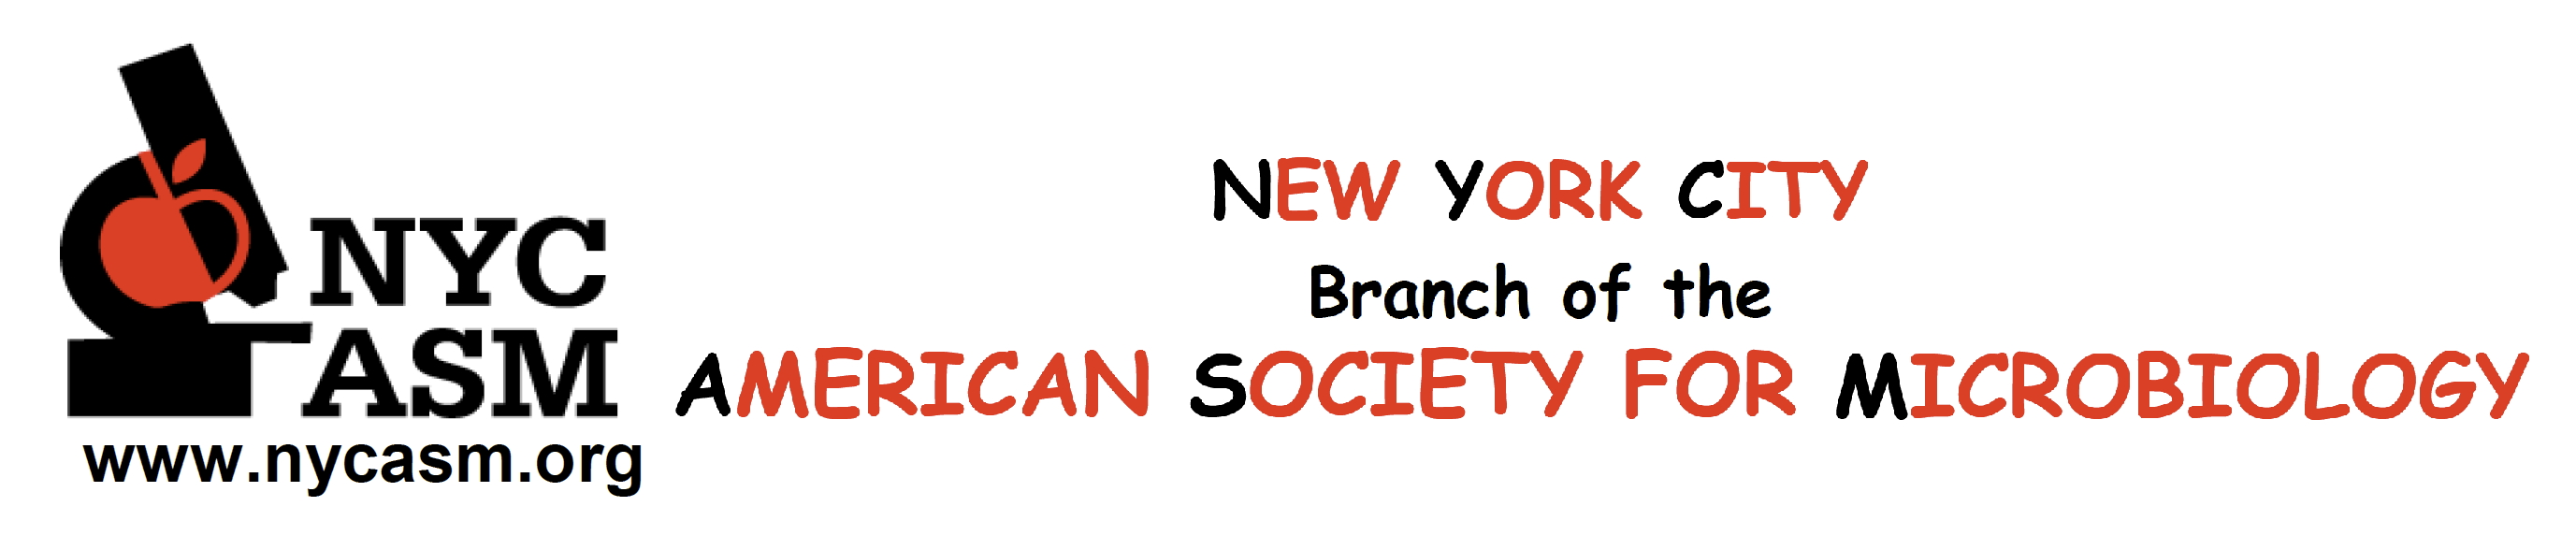 NYCASM - New York City Branch of the American Society of Microbiology